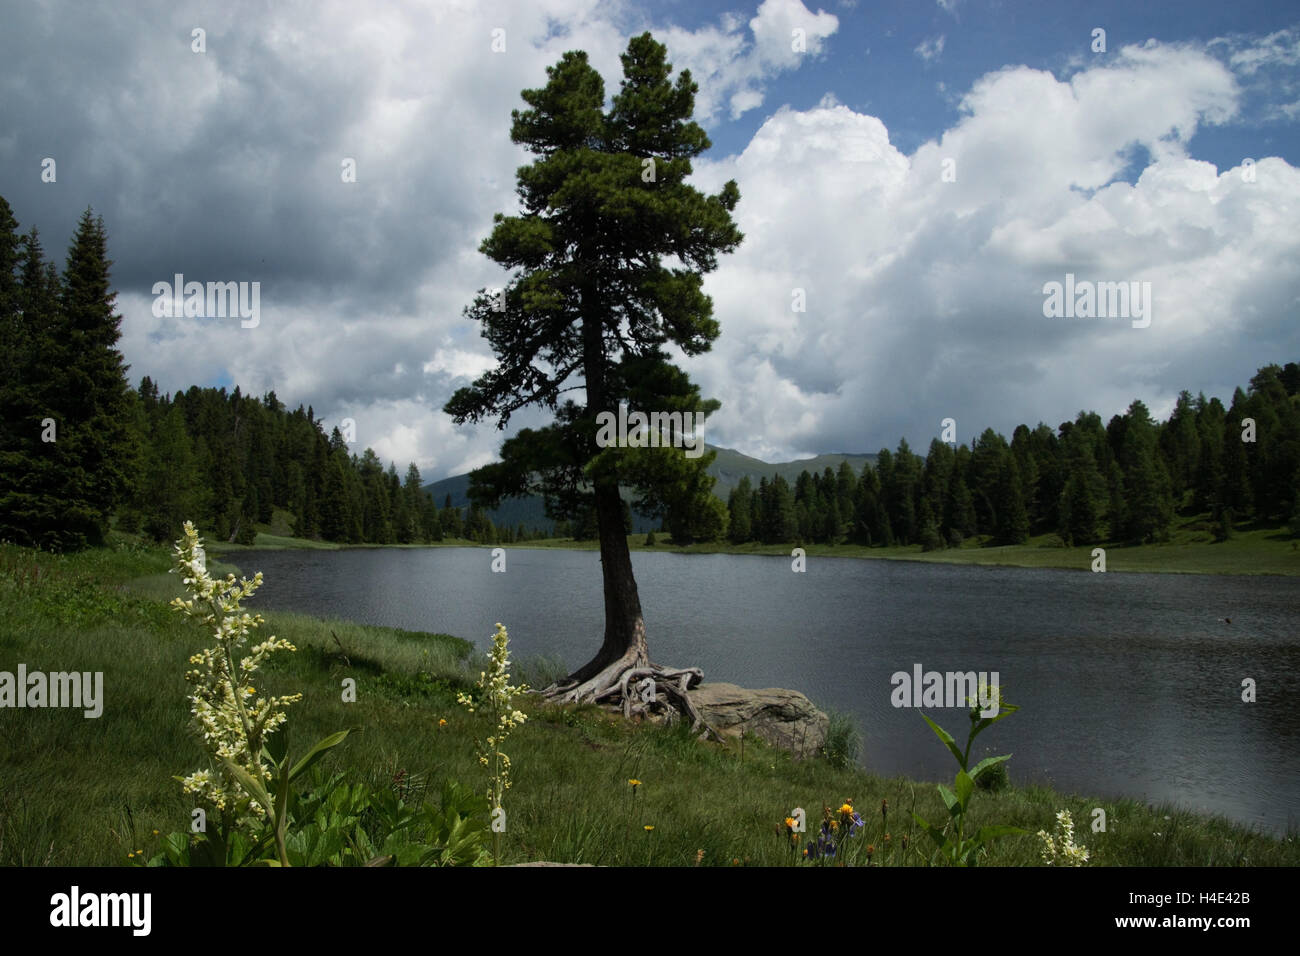 The Black Lake is an Alpine lake at Turracher Hoehe Pass, on the state border of Carinthia and Styria in Austria. Stock Photo